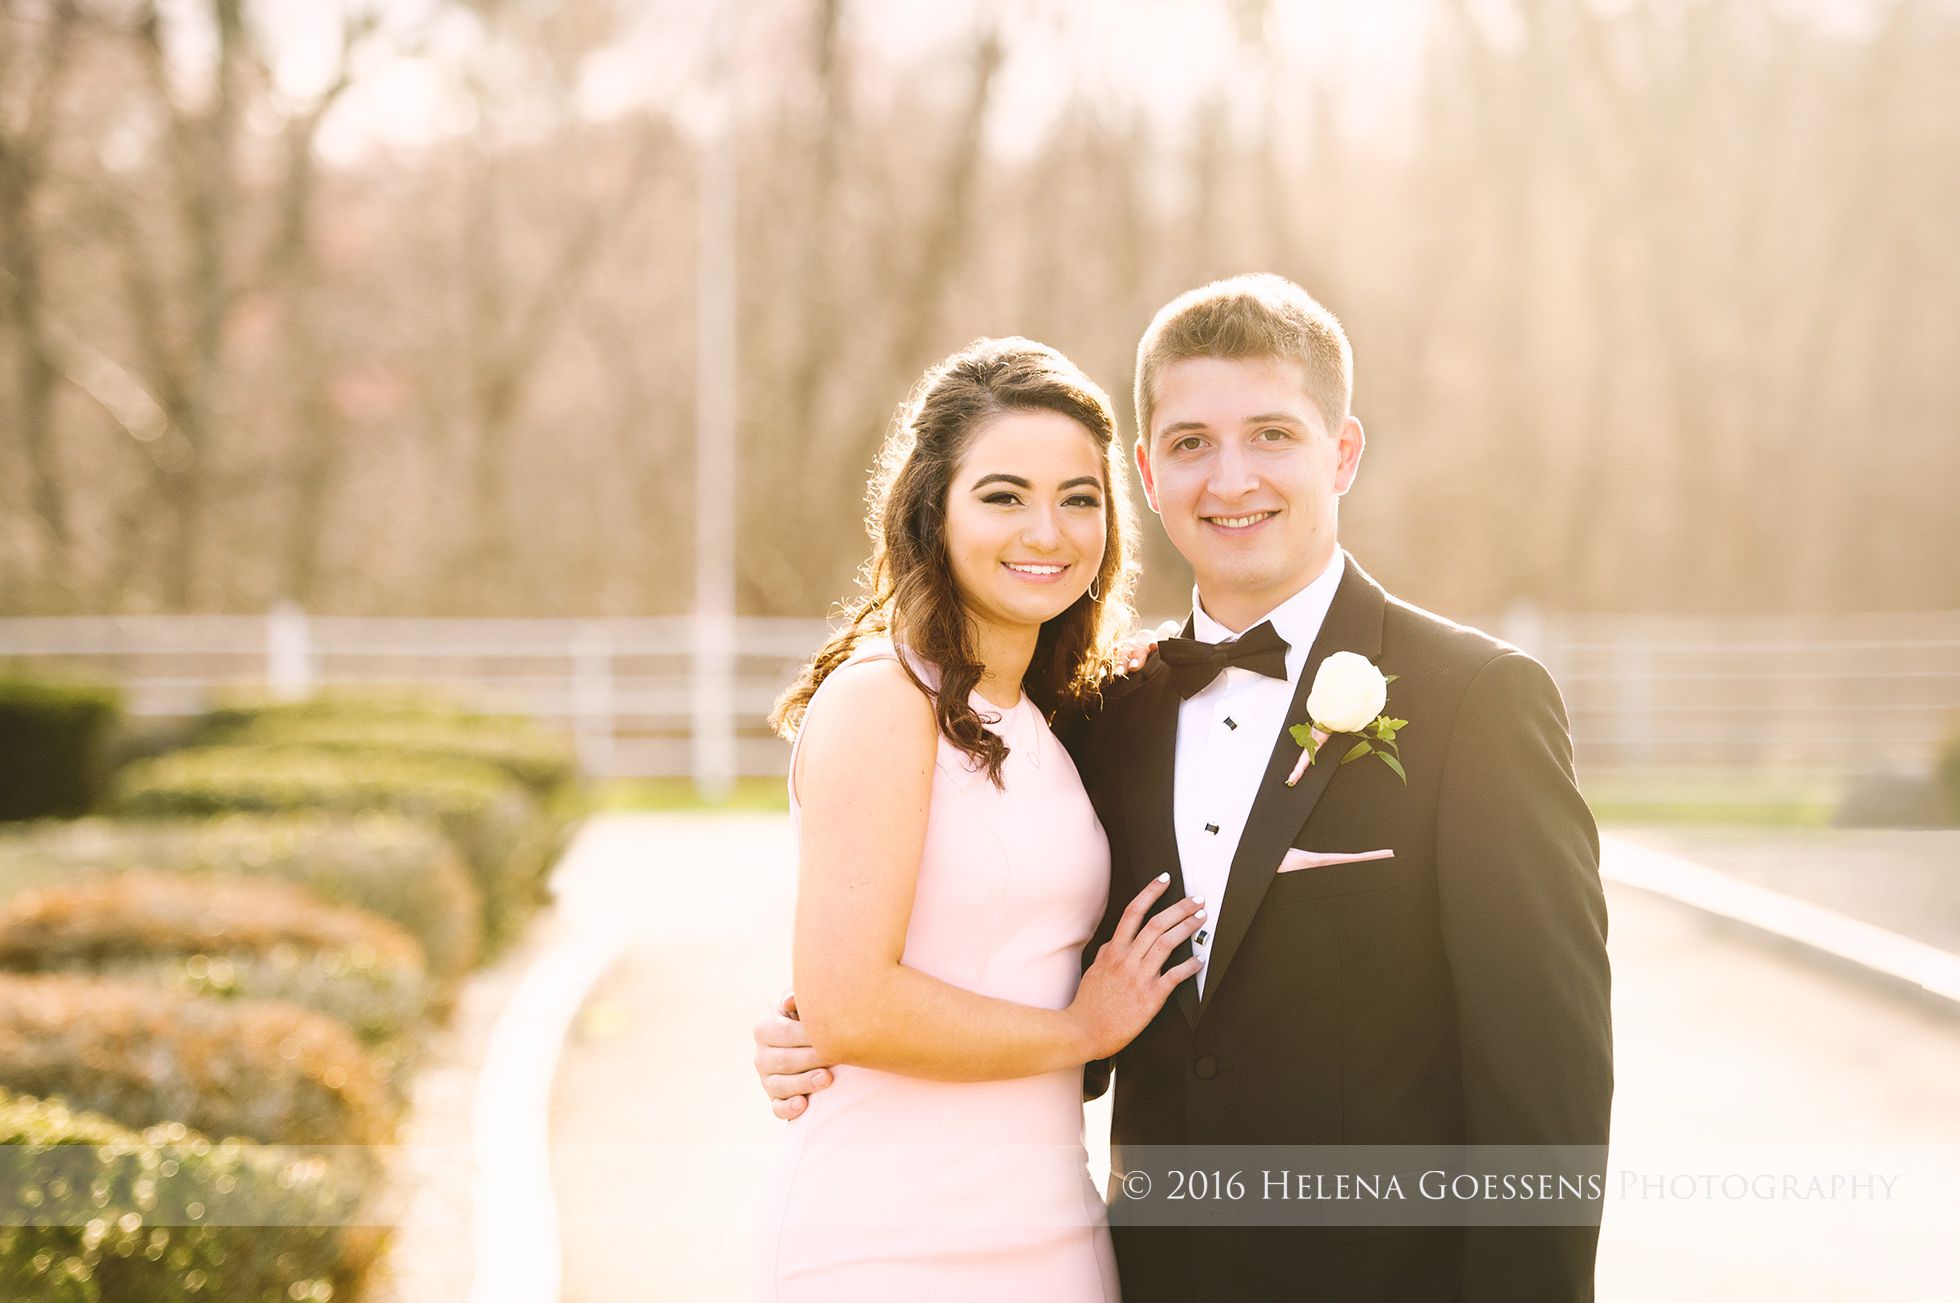 Prom girl wearing a pink dress and a boy in a tuxedo